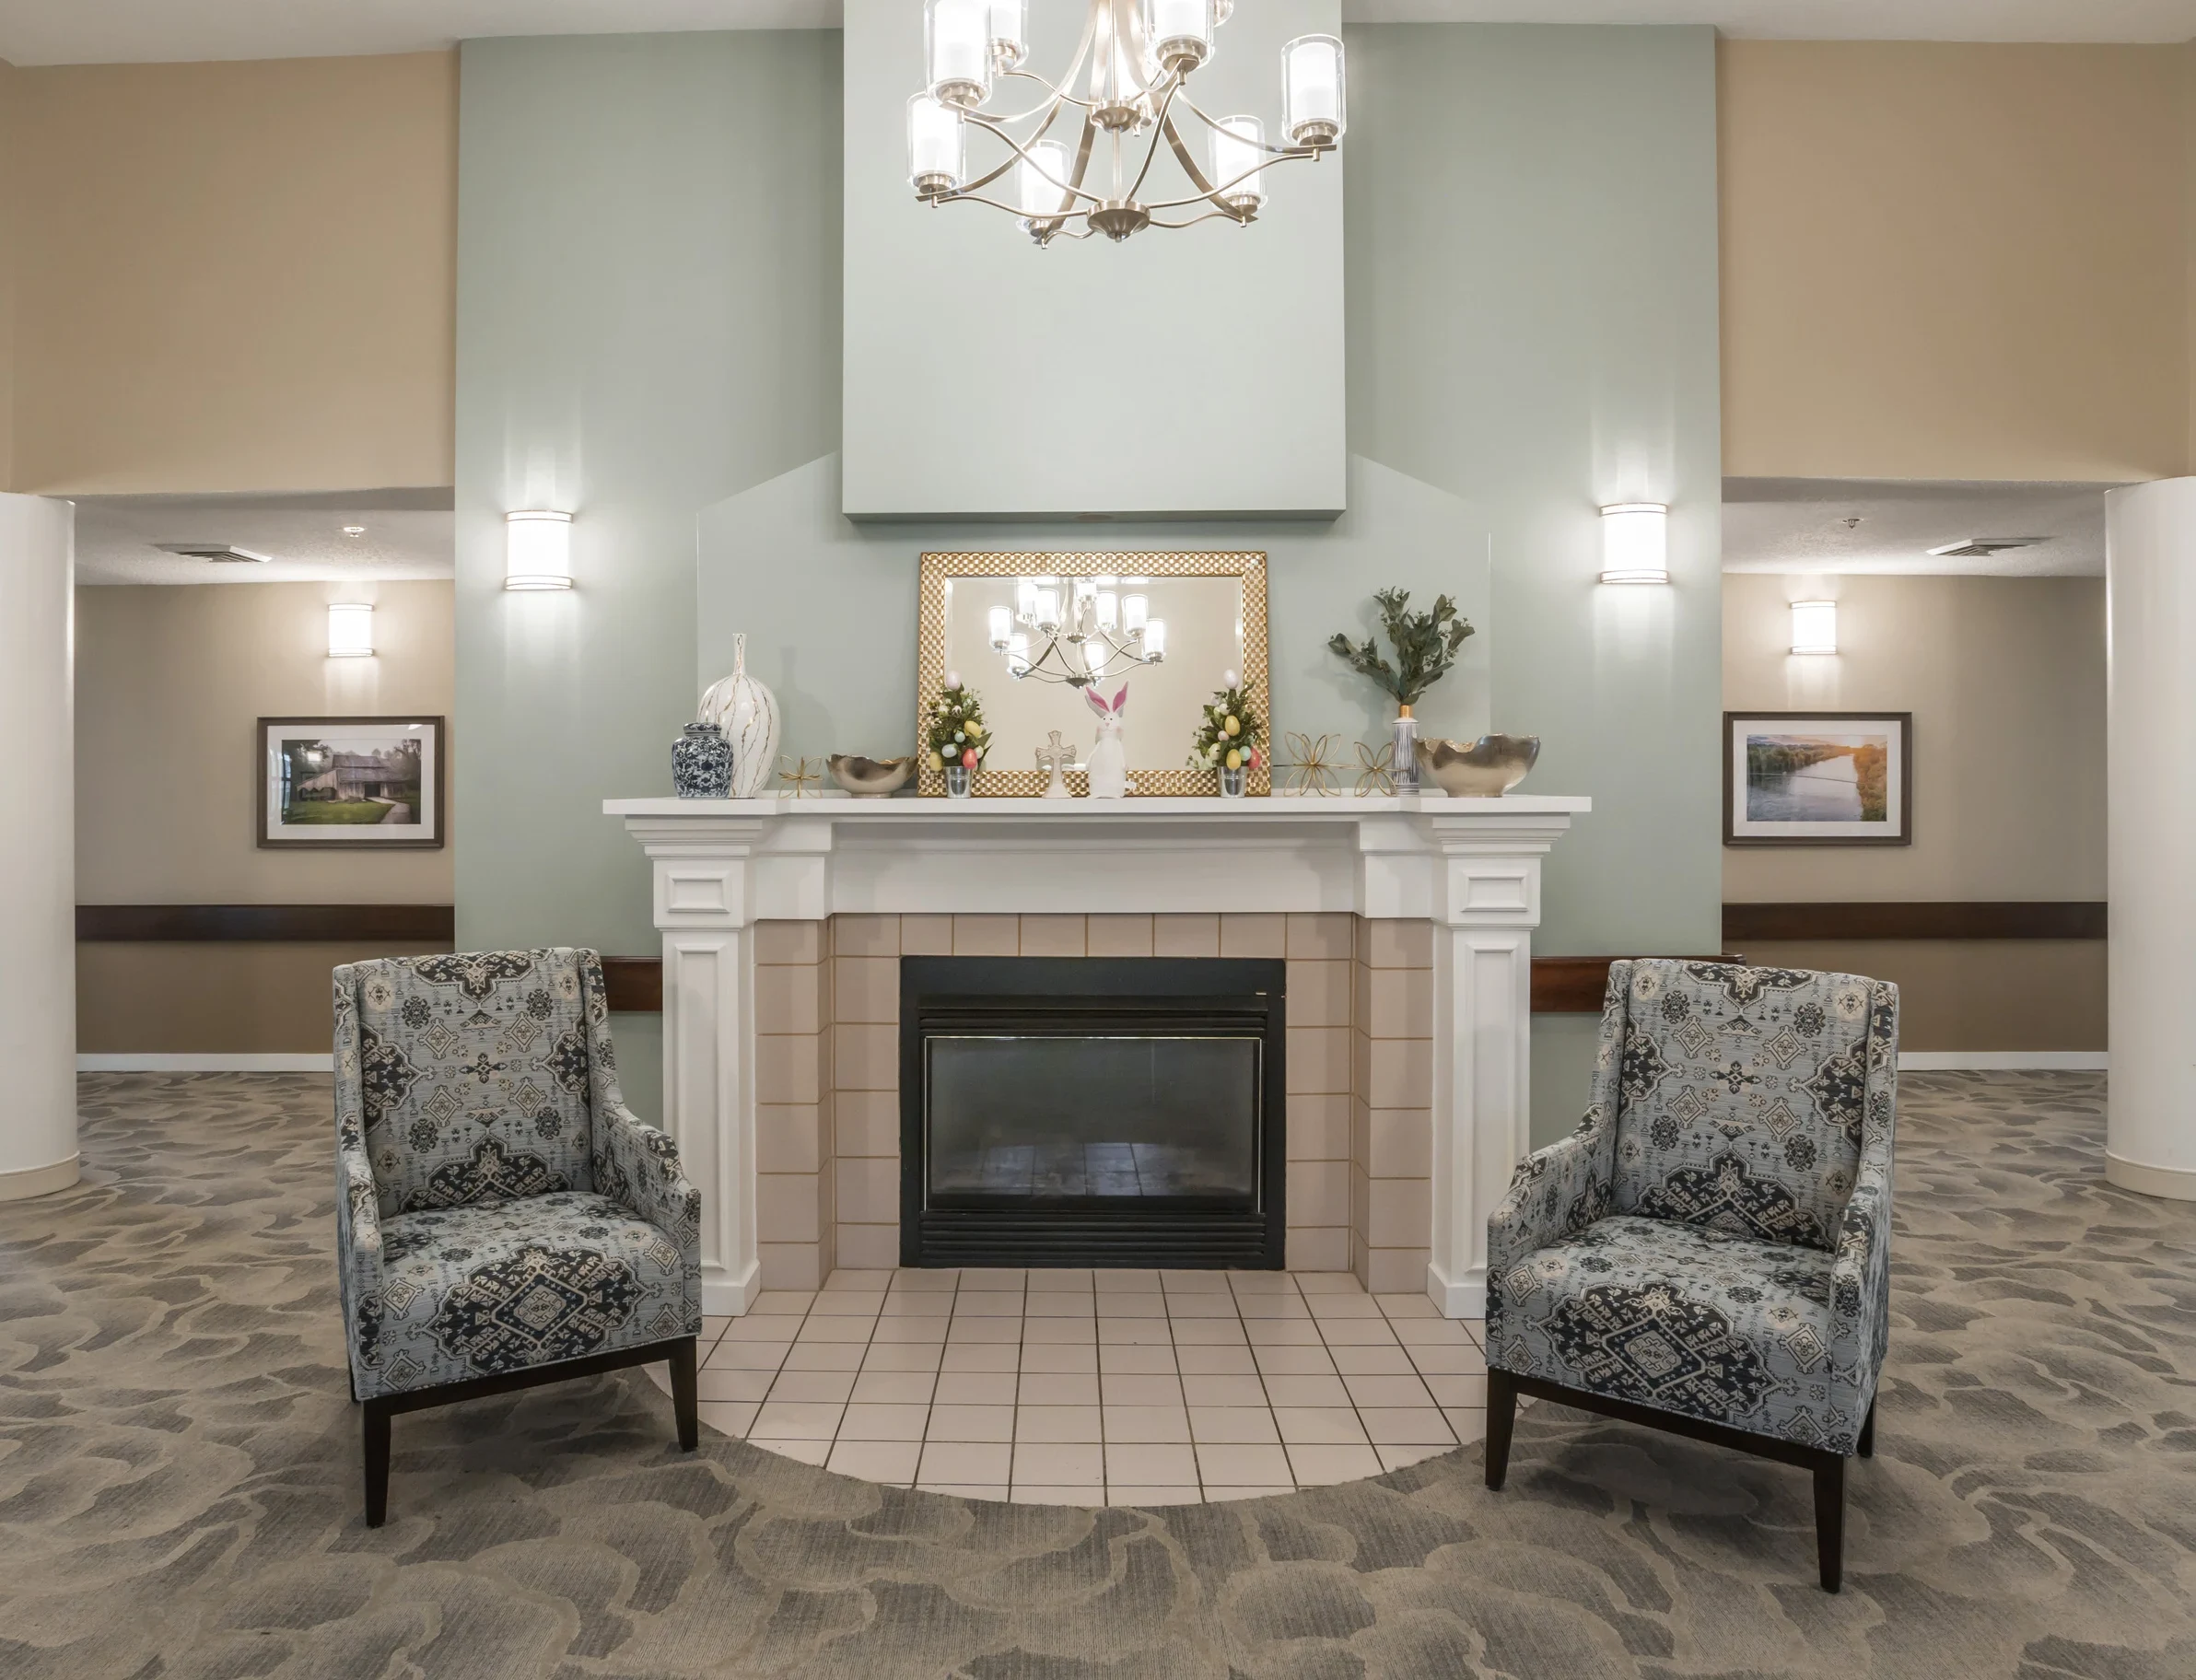 Common area with fireplace at American House Kingsport, a senior home in Kingsport TN